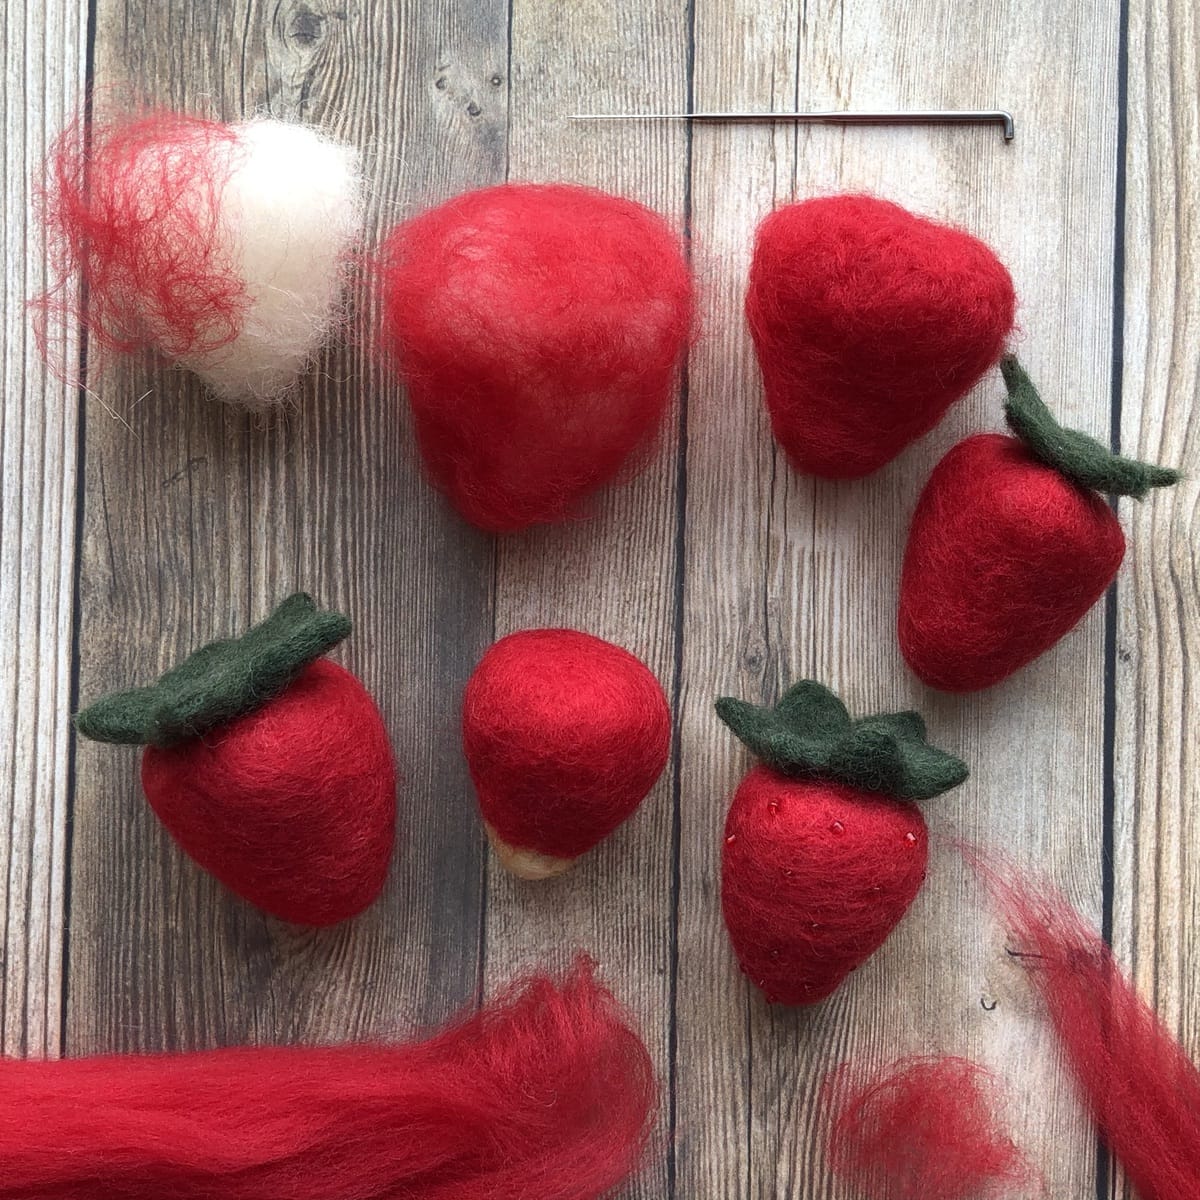 Image description: a collection of needle-felted strawberries in various stages of completion.